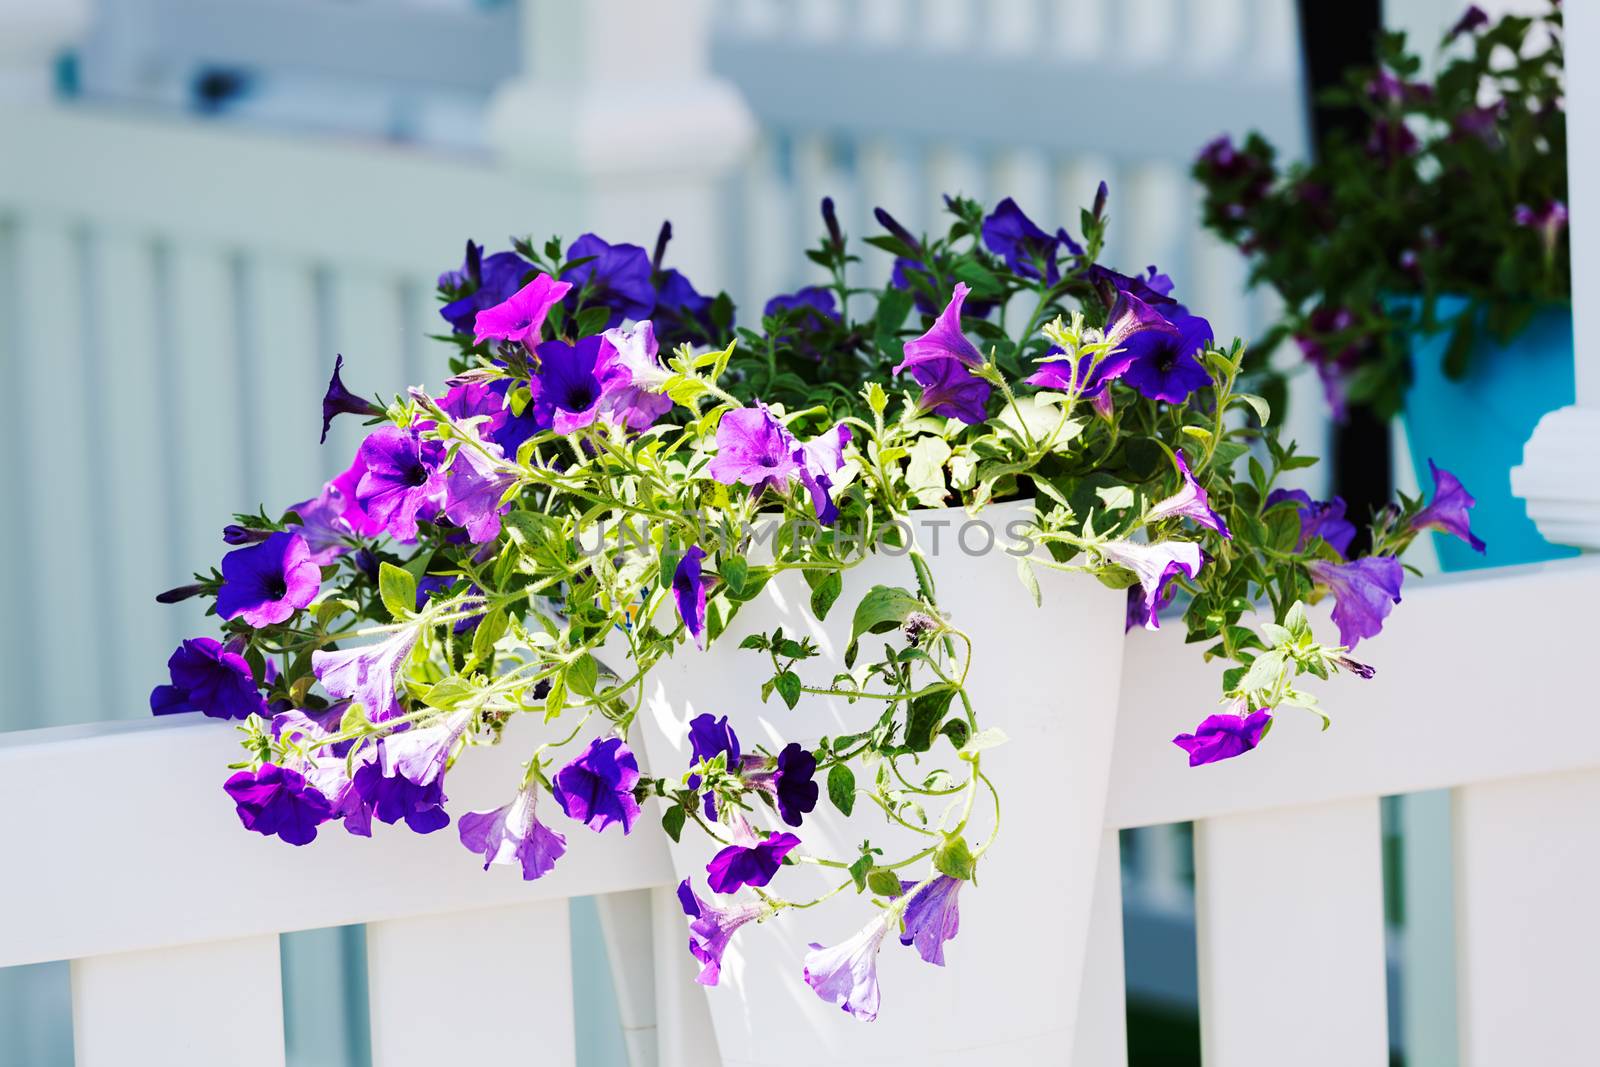 purple flowers as decoration fence, note shallow depth of field